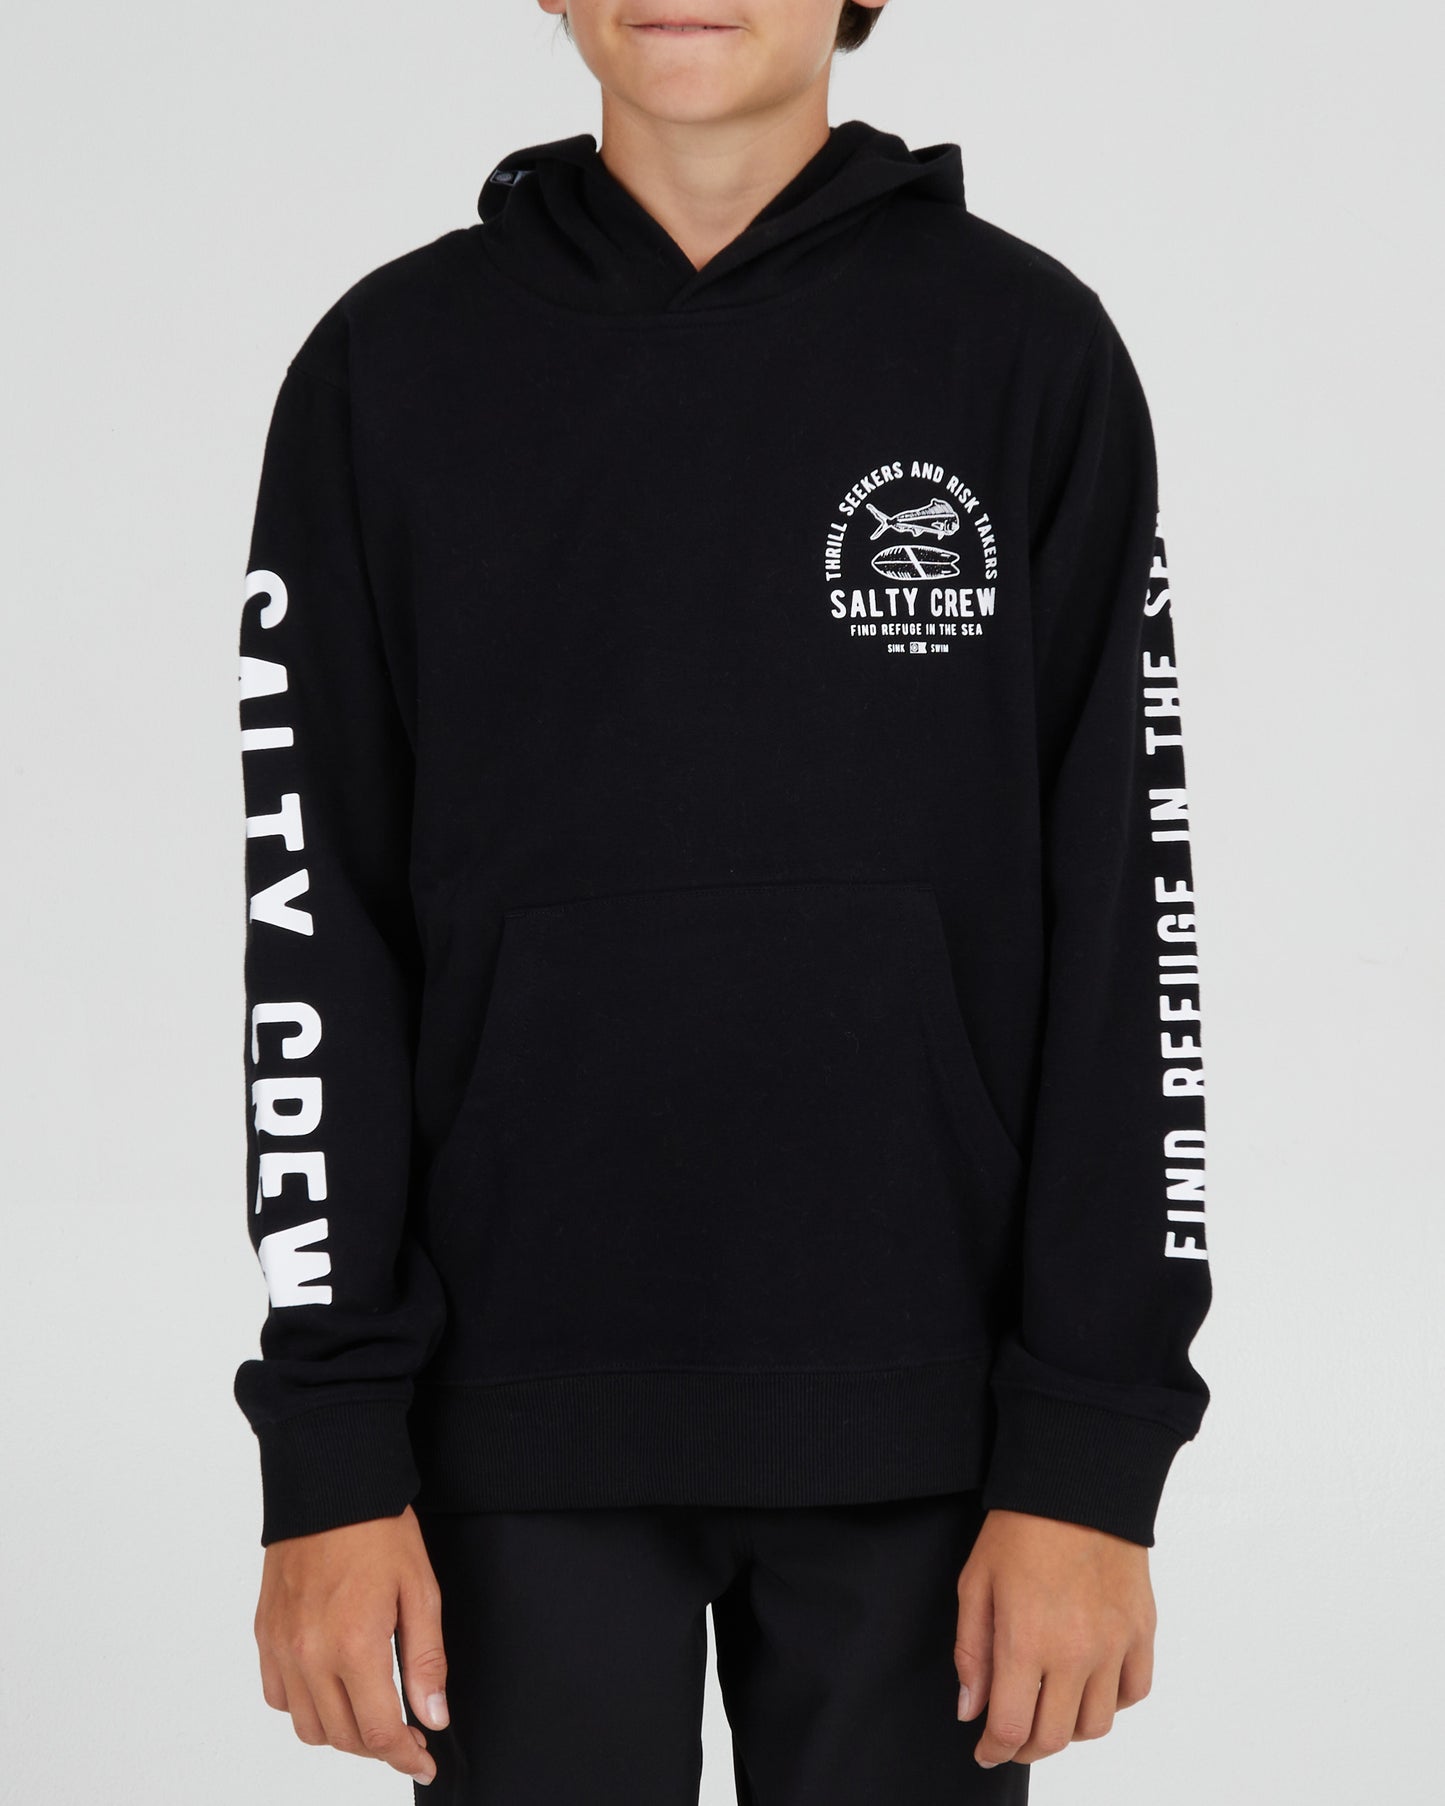 On body front of the Lateral Line Boys Black Hooded Fleece